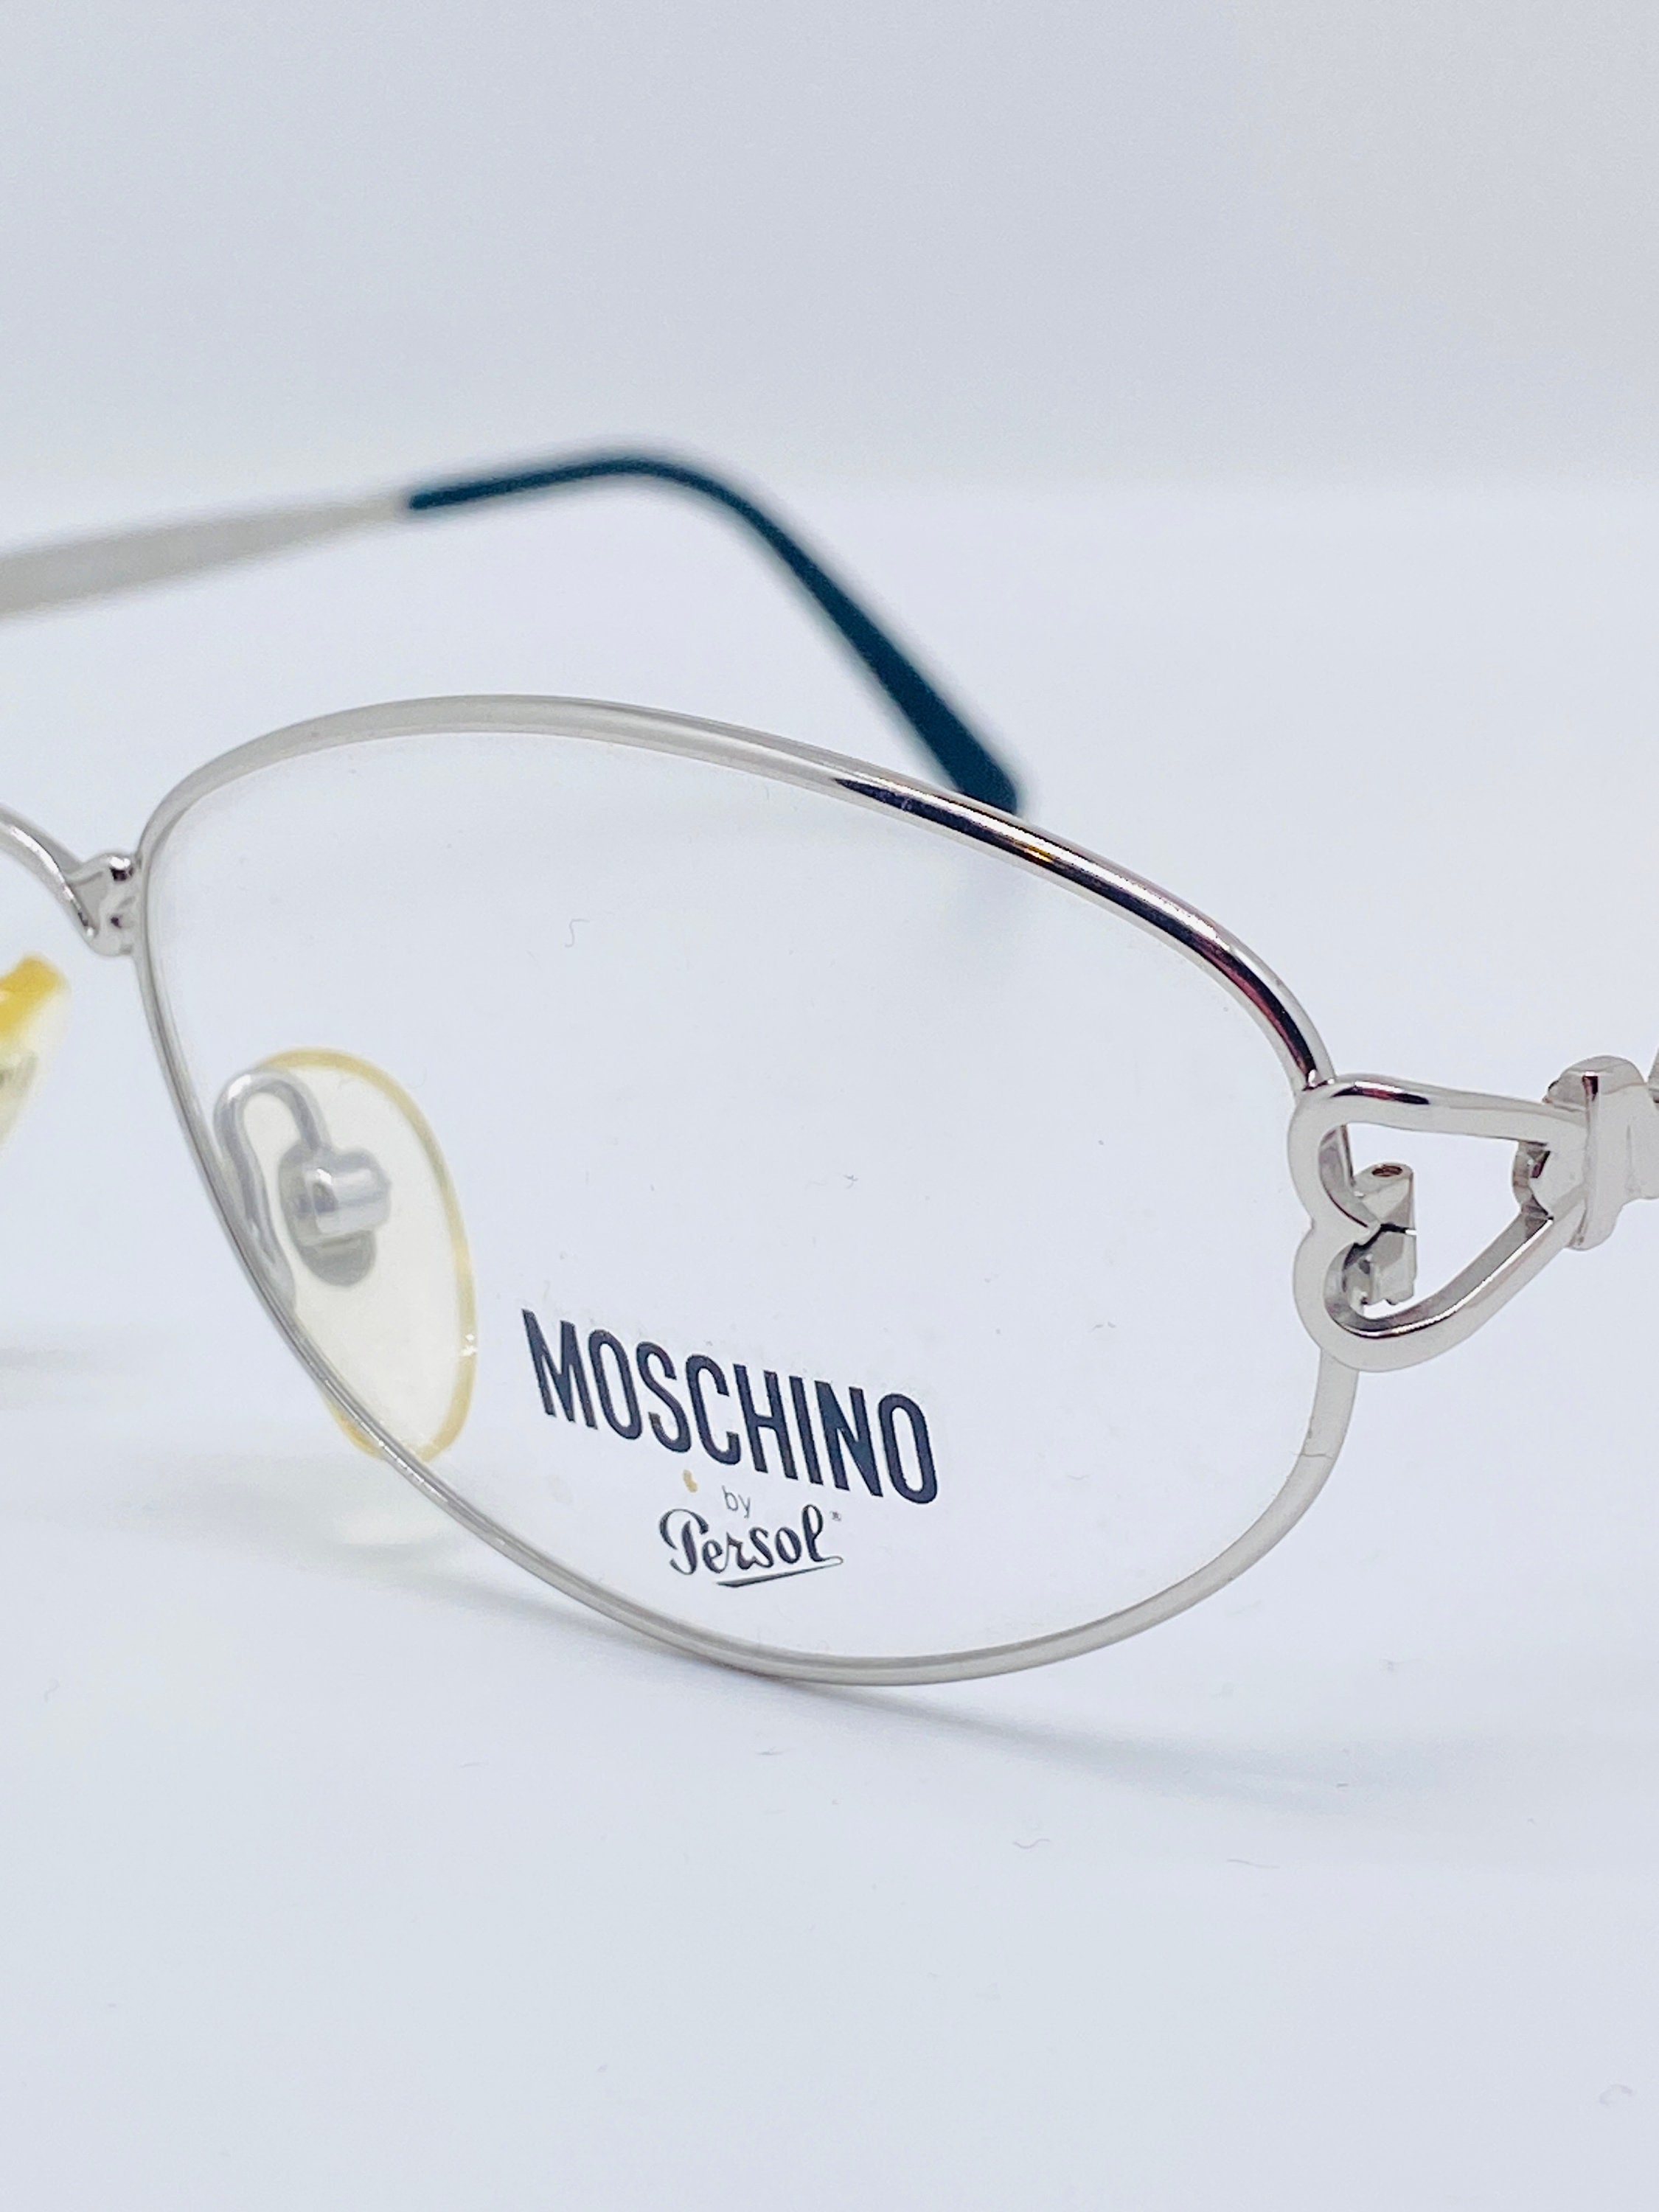 MOSCHINO by Persol Mm725 Ns 53 18 135 Vintage Glasses DEADSTOCK